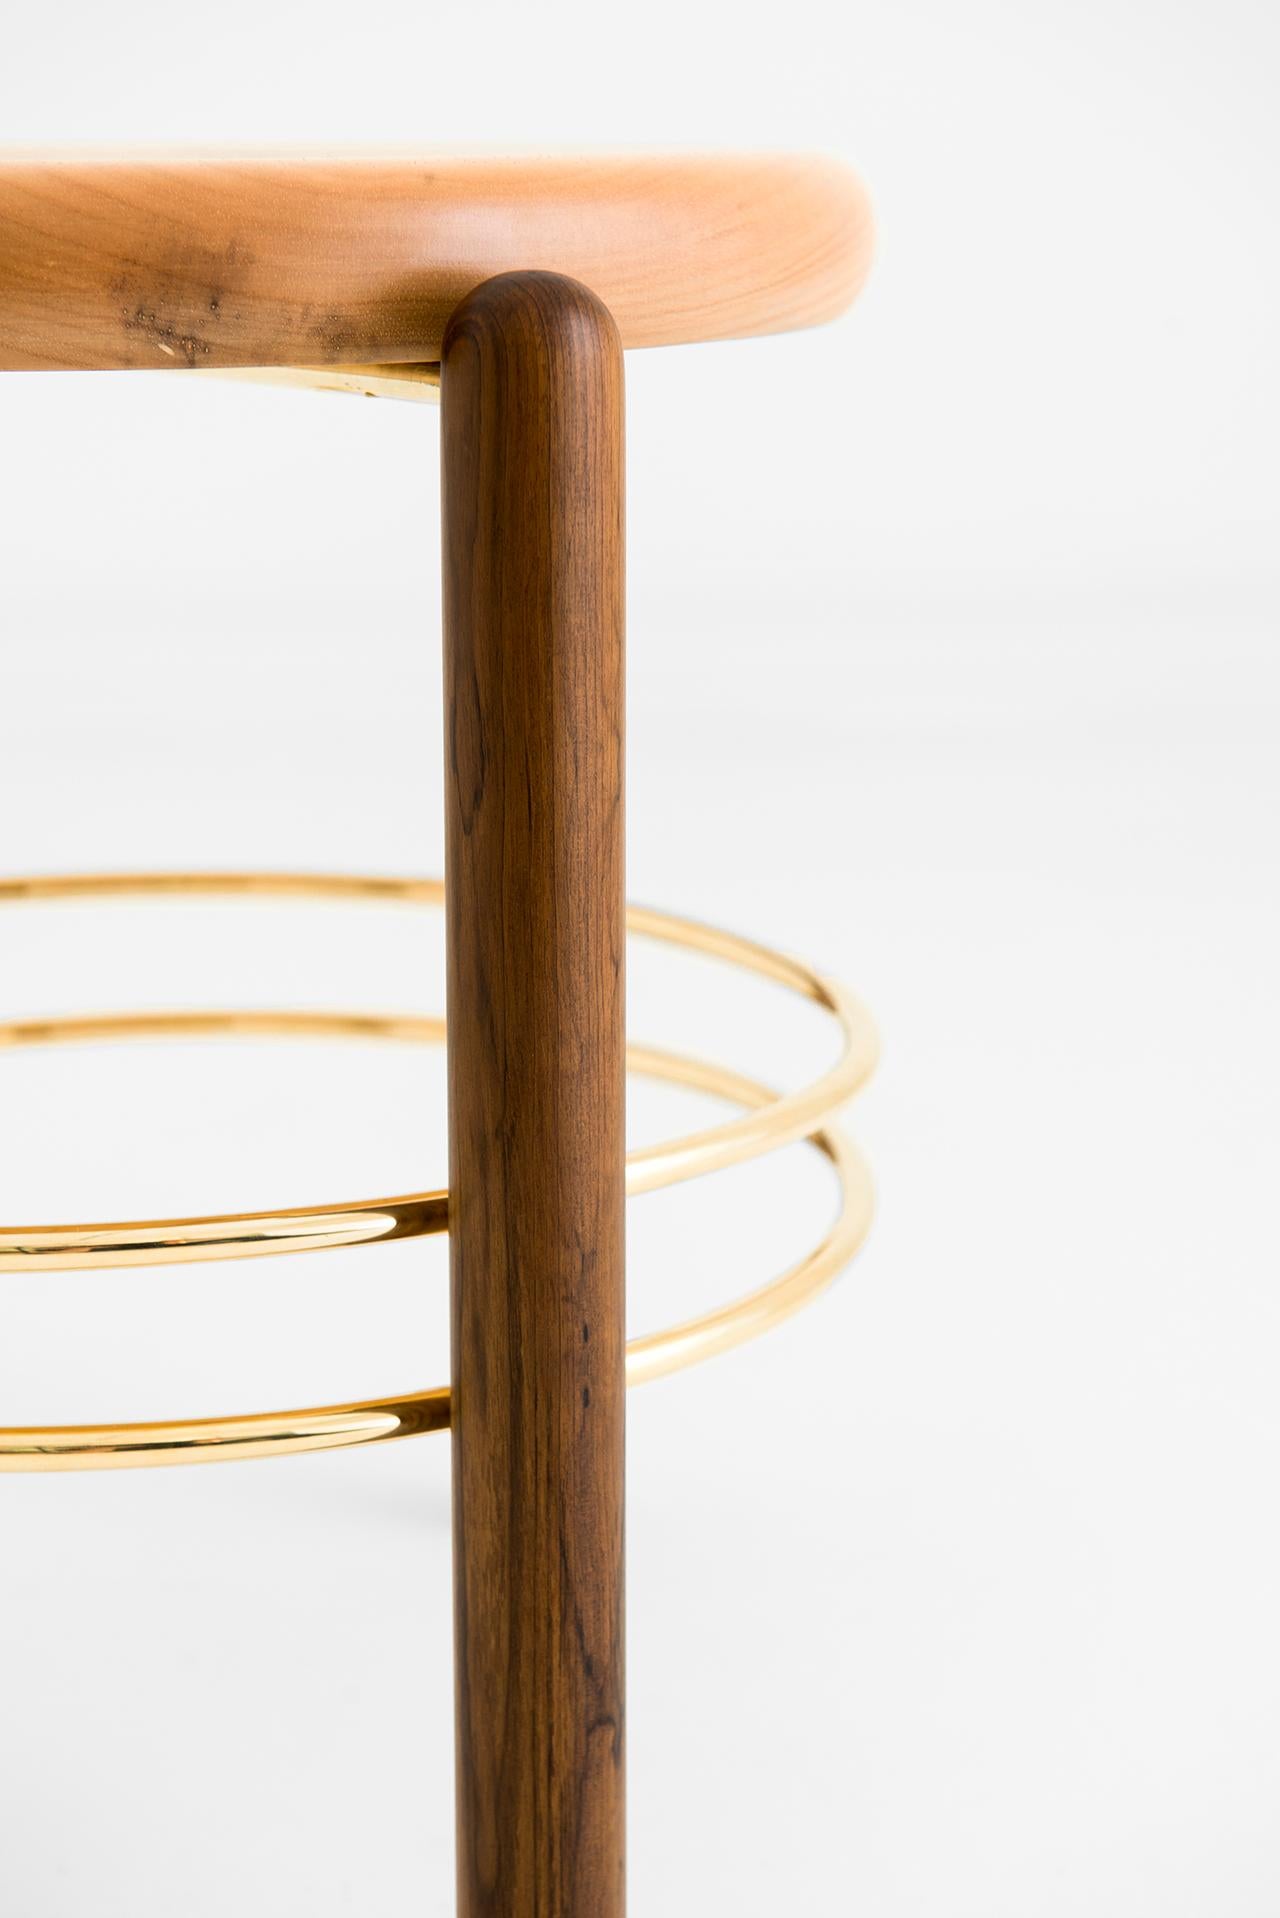 Brazilian Brass and Wood Sculpted Stool by Leandro Garcia Contemporary Brazil Design For Sale